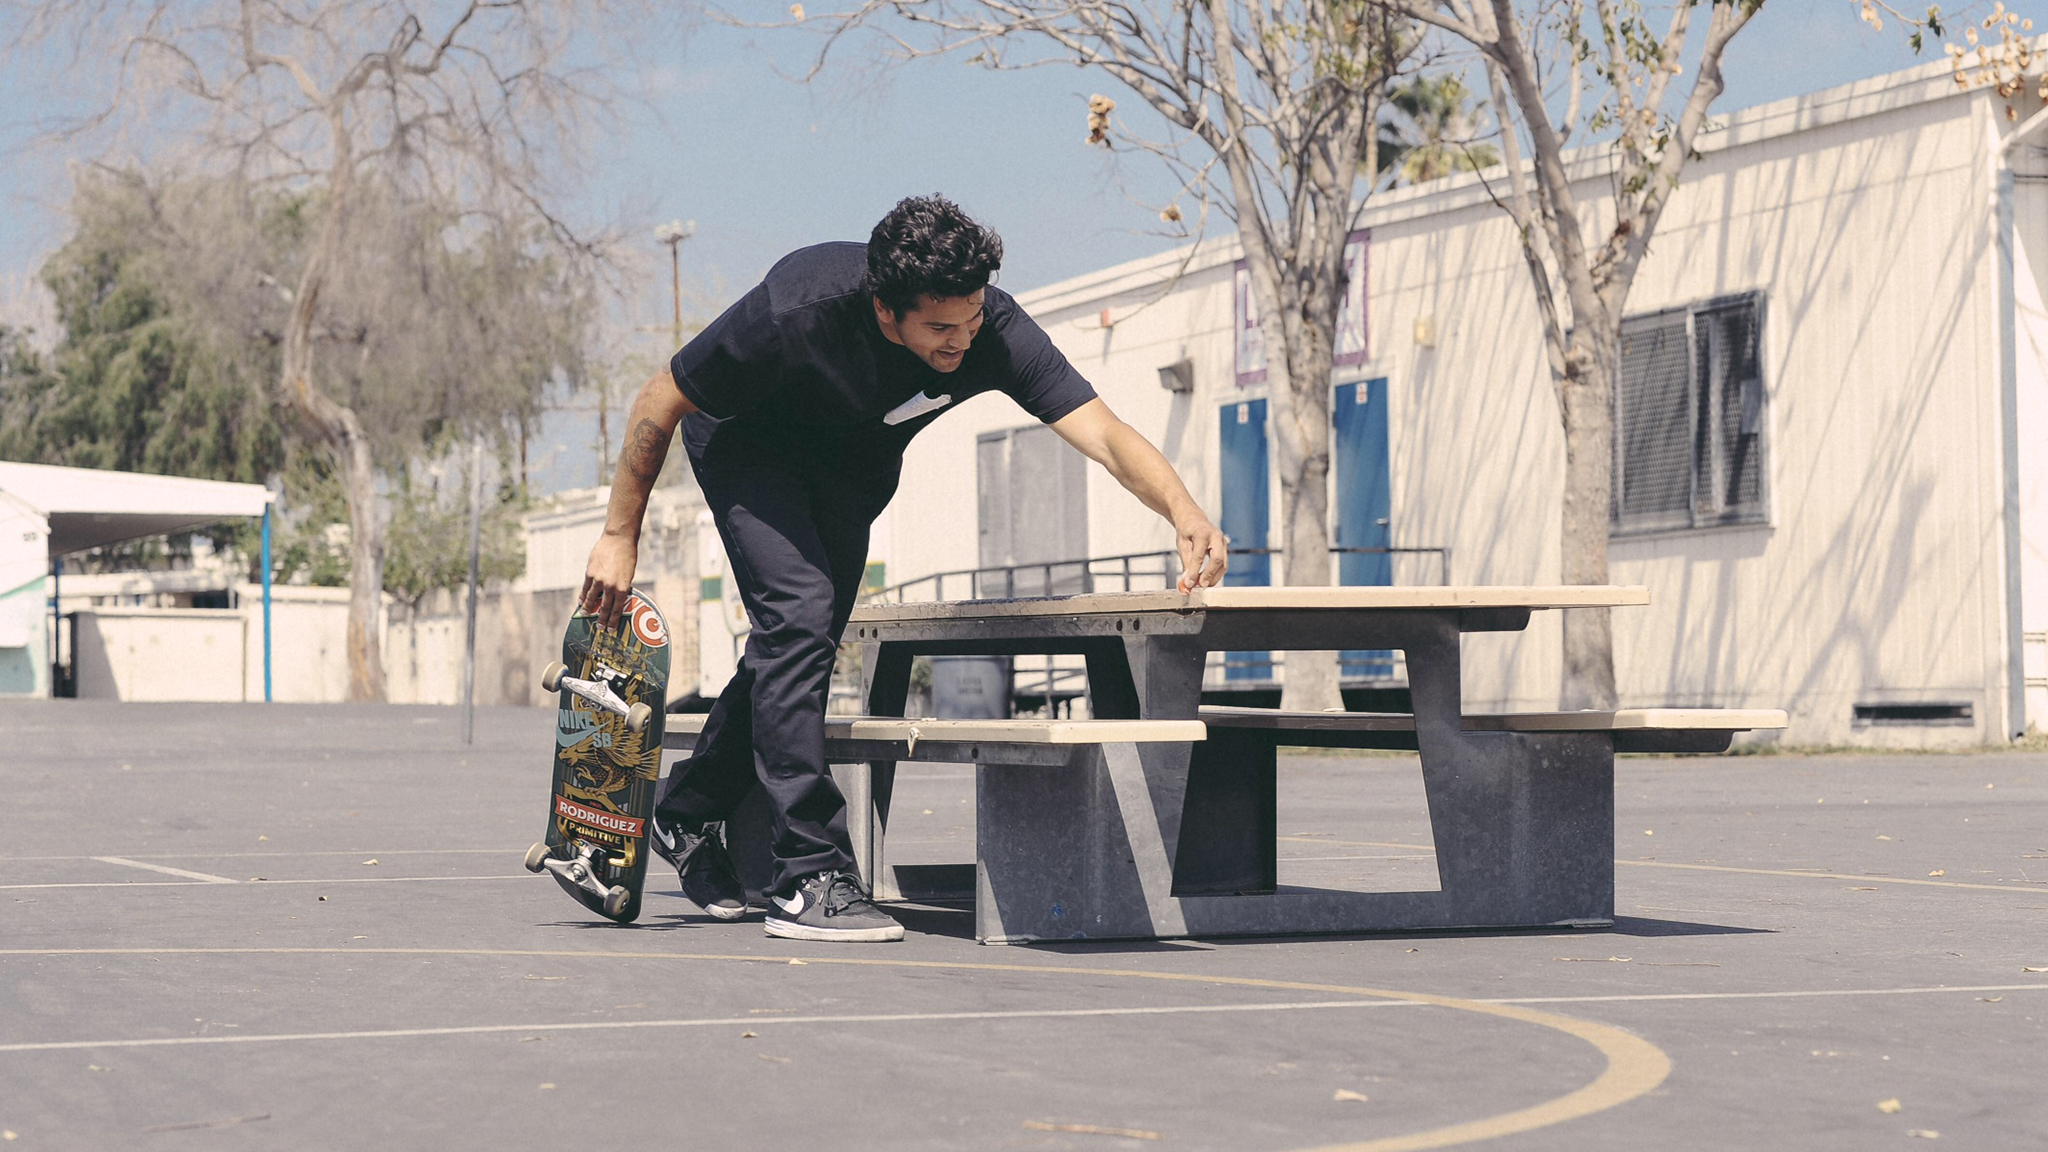 Paul Rodriguez Discusses Launch Of New Brand Life After